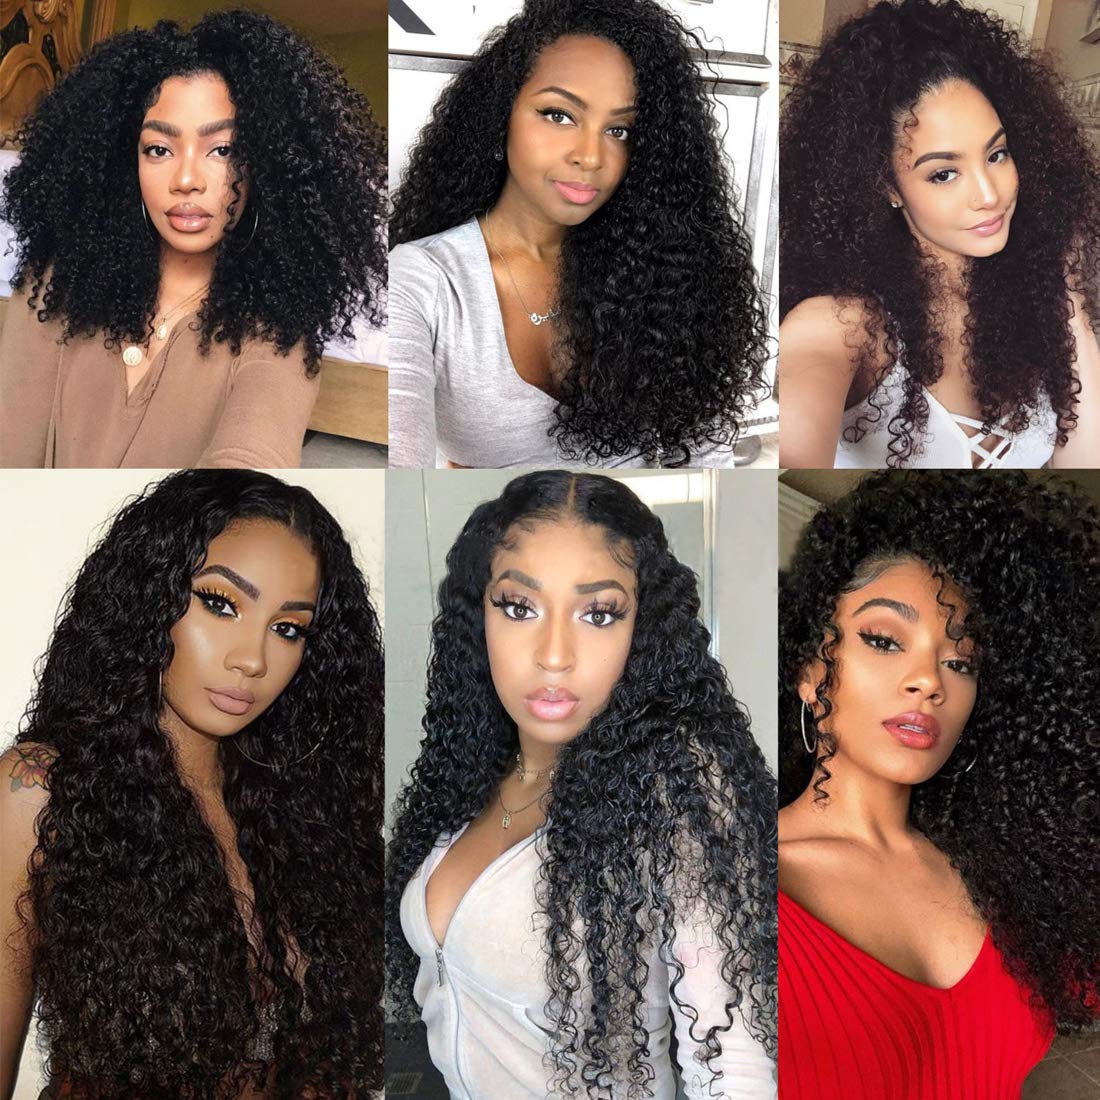 Idoli Indian Curly Hair 3 Bundles with Closure